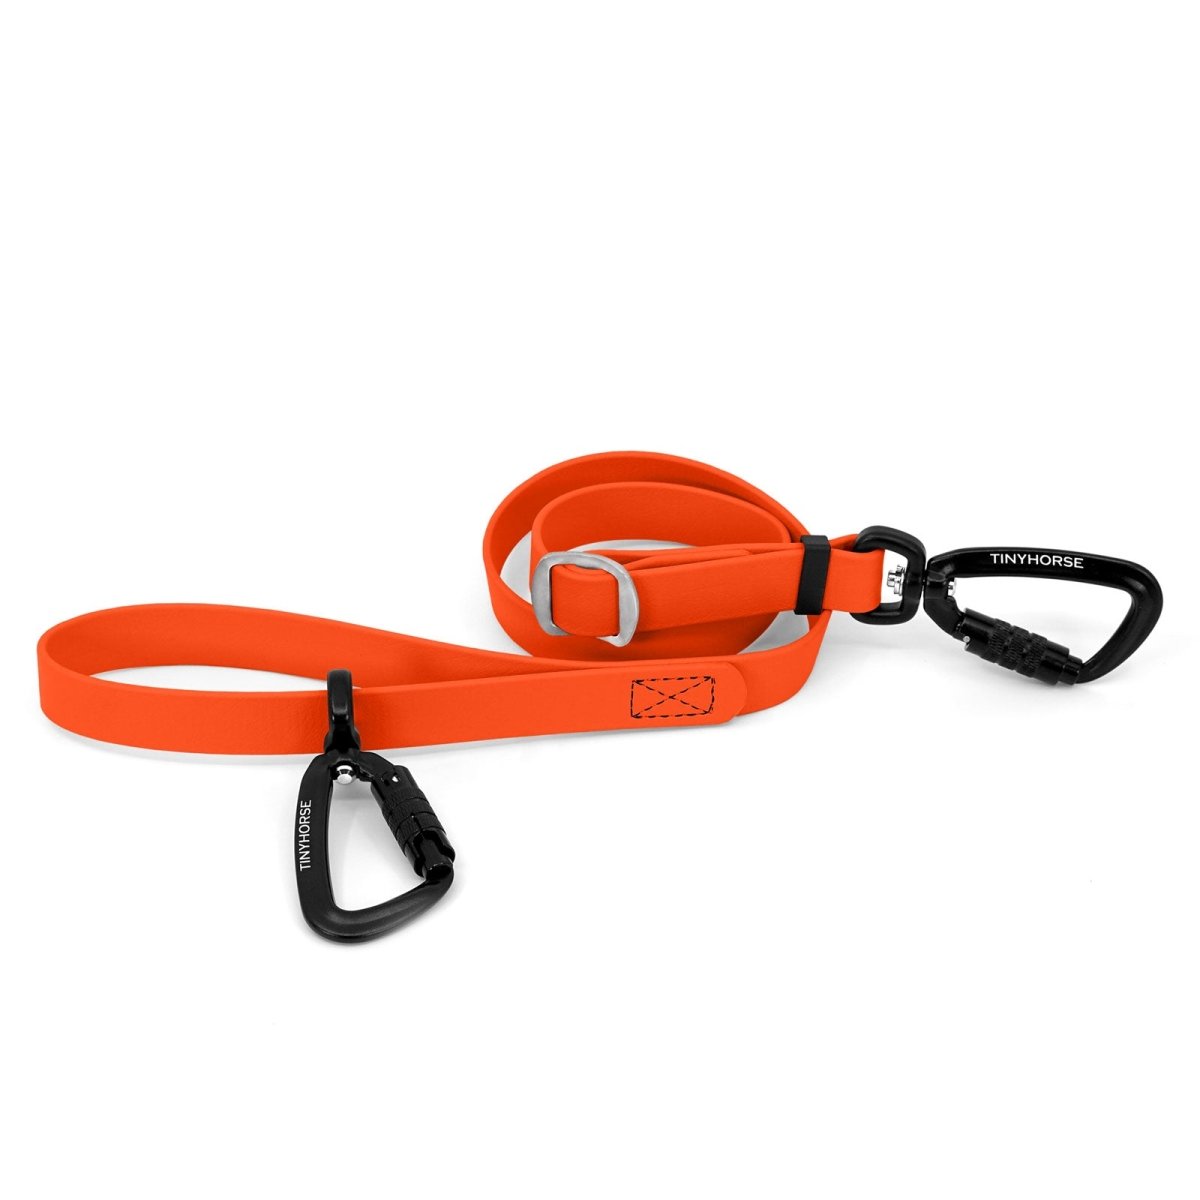 An adjustable neon orange-coloured Lead-All Pro made of BioThane with 2 auto-locking carabiners